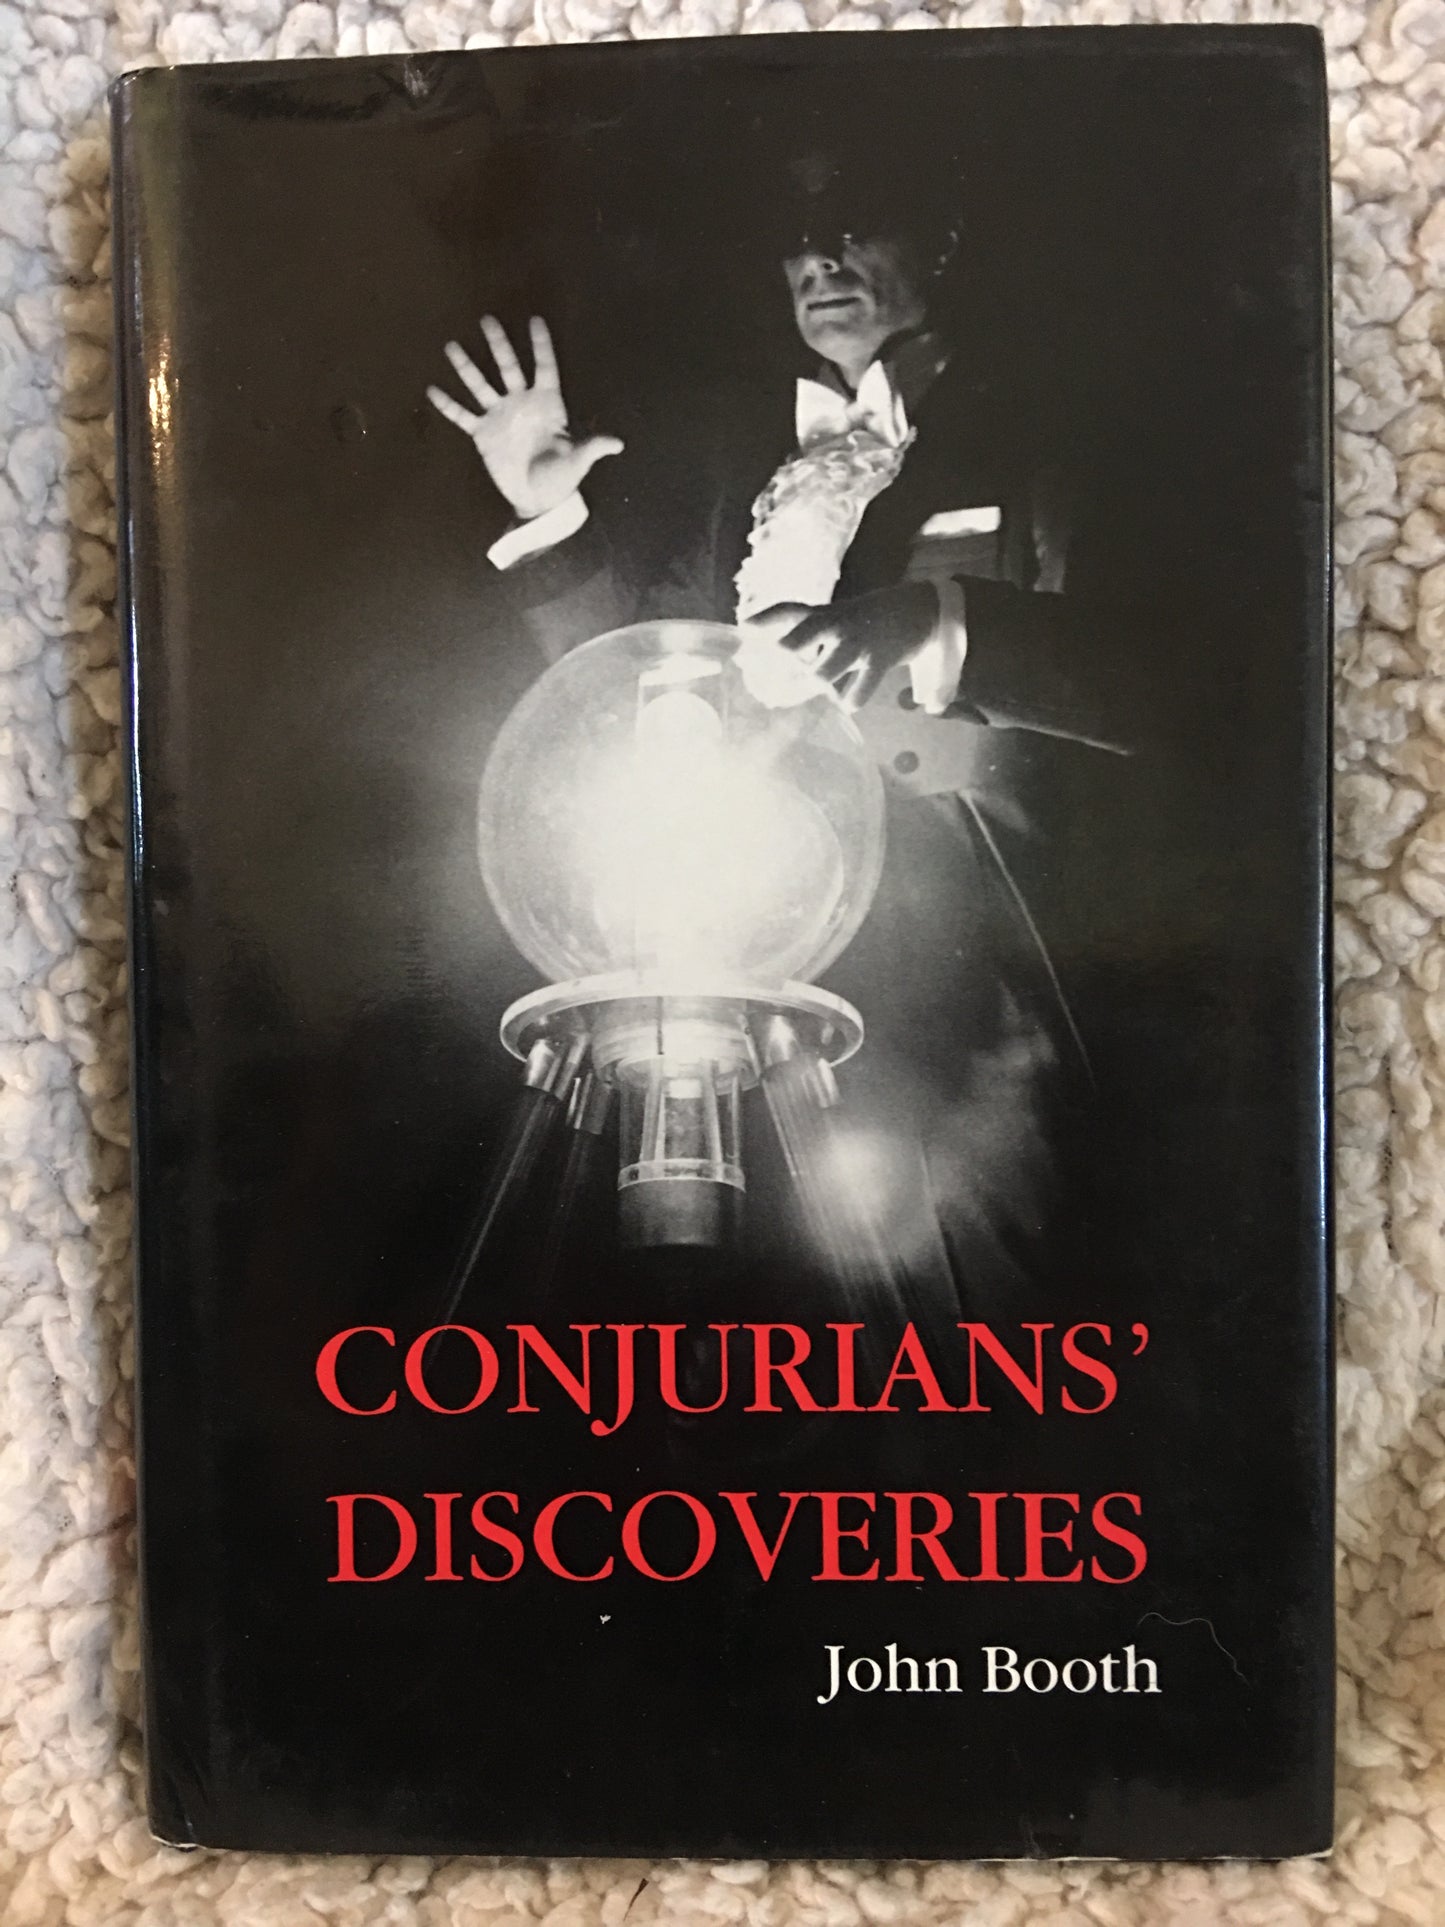 Conjurians' Discoveries - John Booth